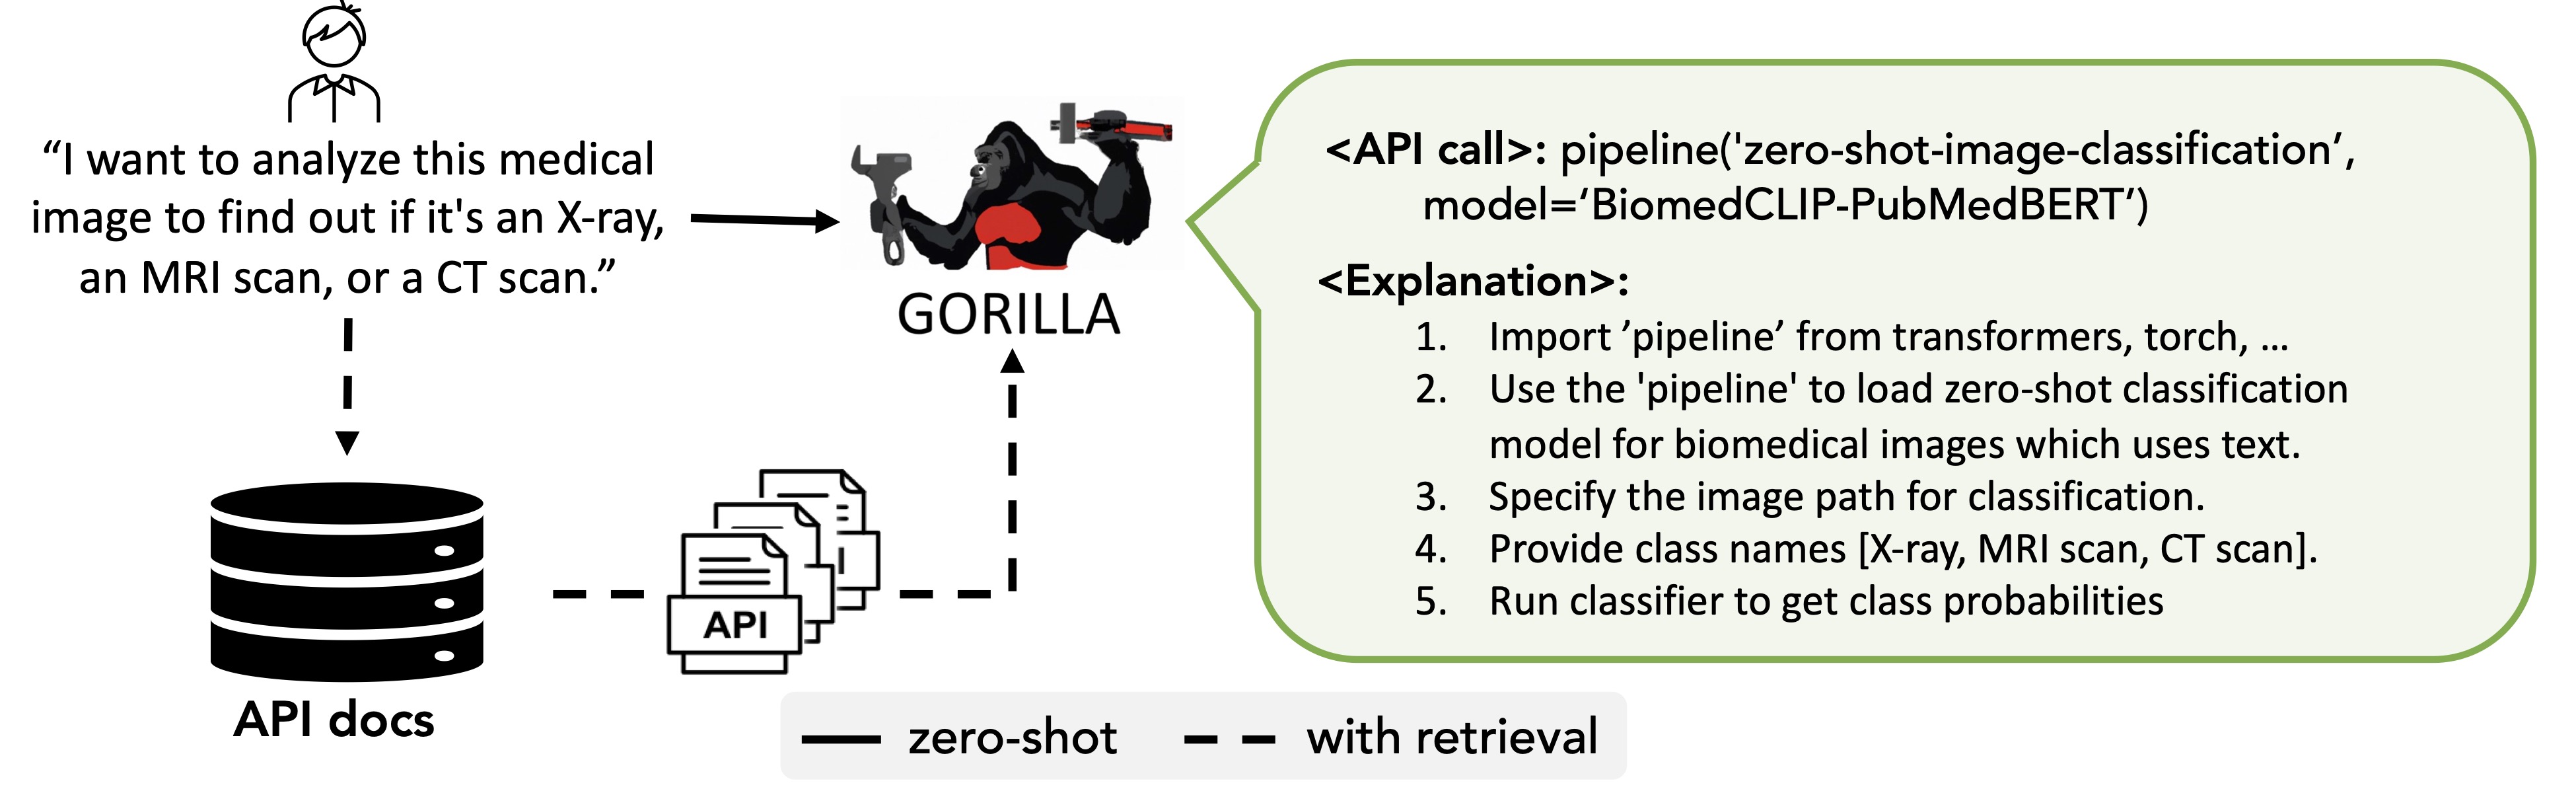 Gorilla can be used in zero-shot and with retrievers